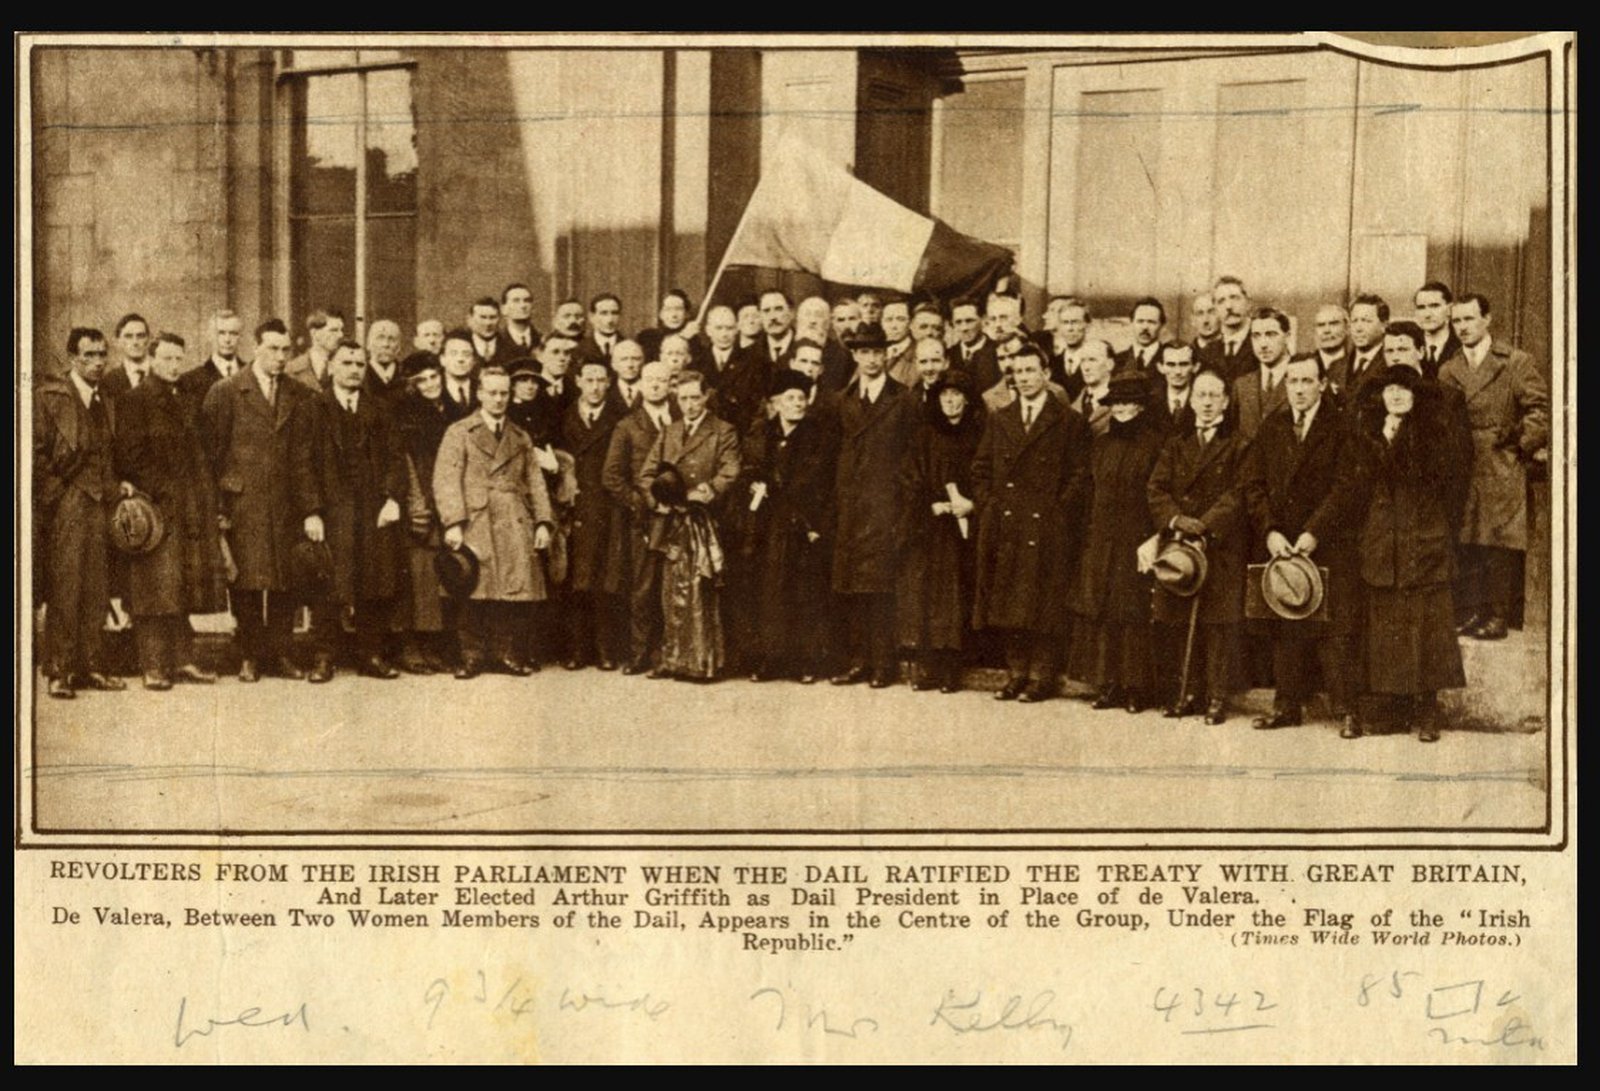 Image - WALKOUT: Photographs of Éamon de Valera and the anti-Treaty TDs, taken just after they walked out of the Dáil in protest. Credit: Military Archives